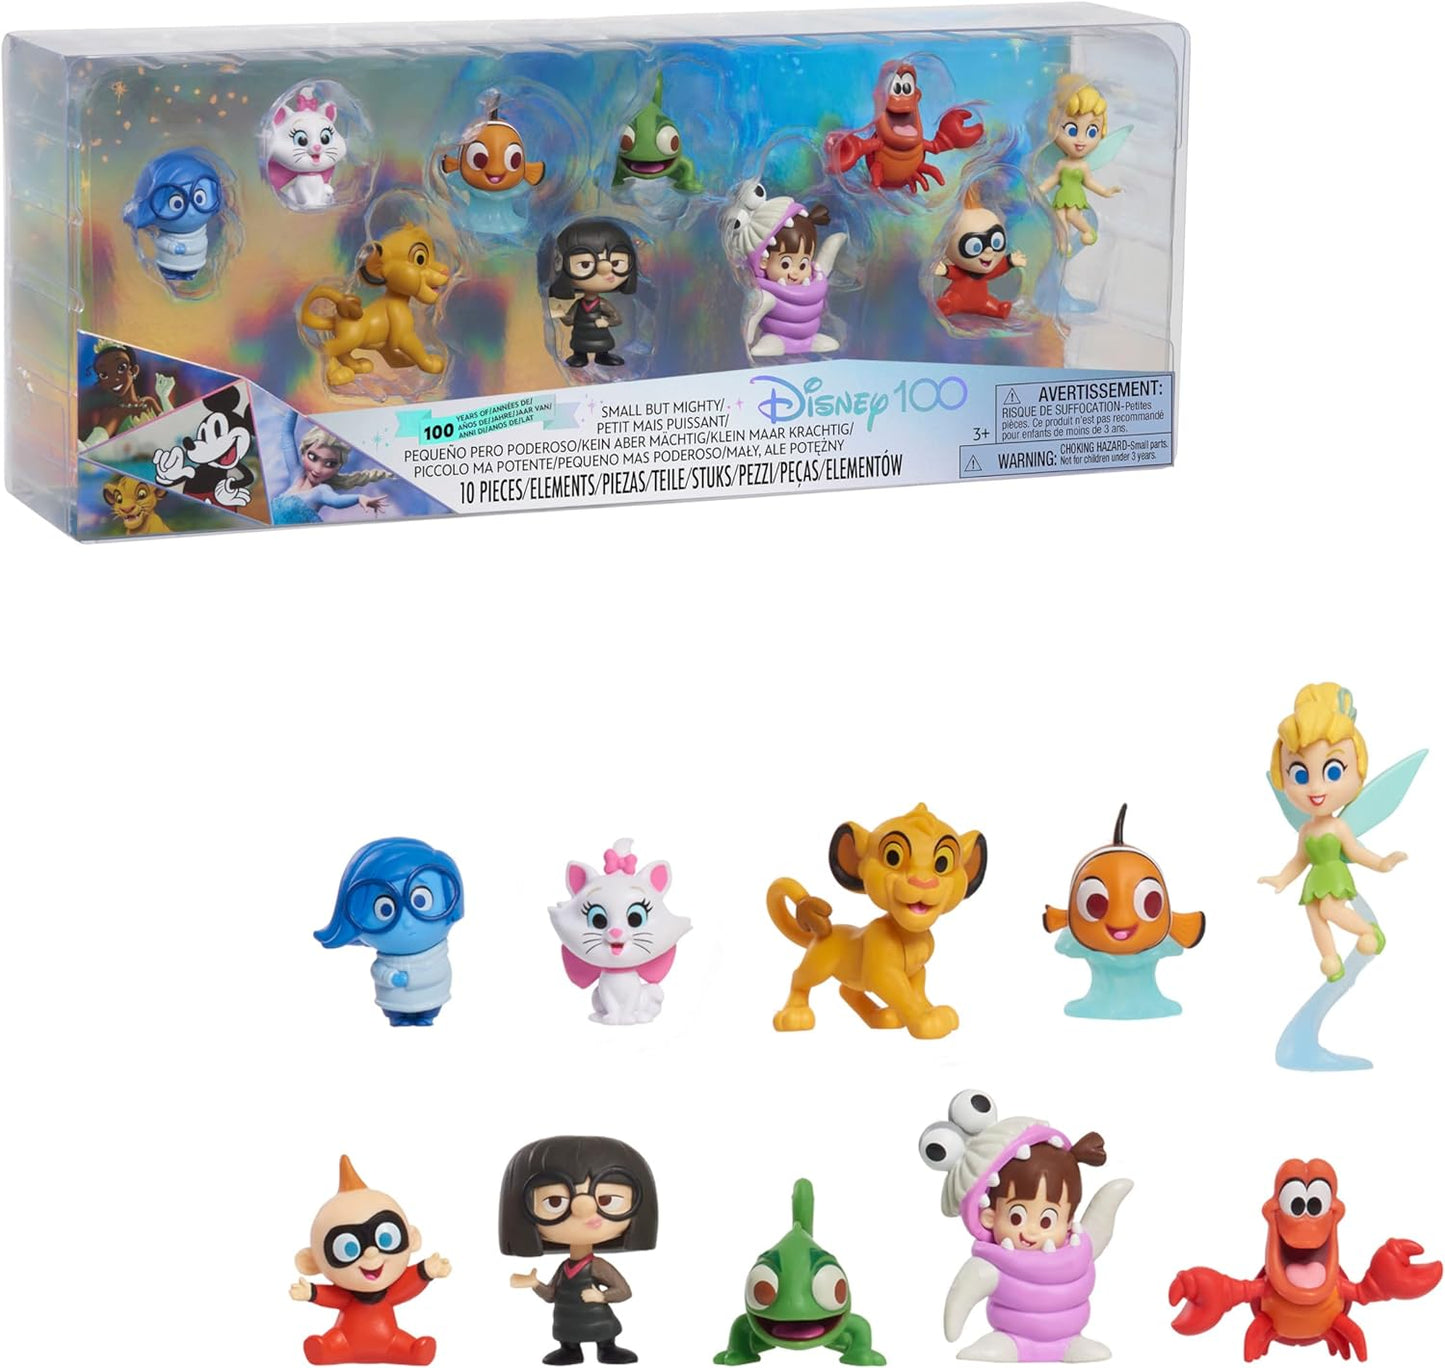 Disney100 Years of Small But Mighty, Limited Edition 10-piece Figure Set, Officially Licensed Kids Toys for Ages 3 Up by Just Play